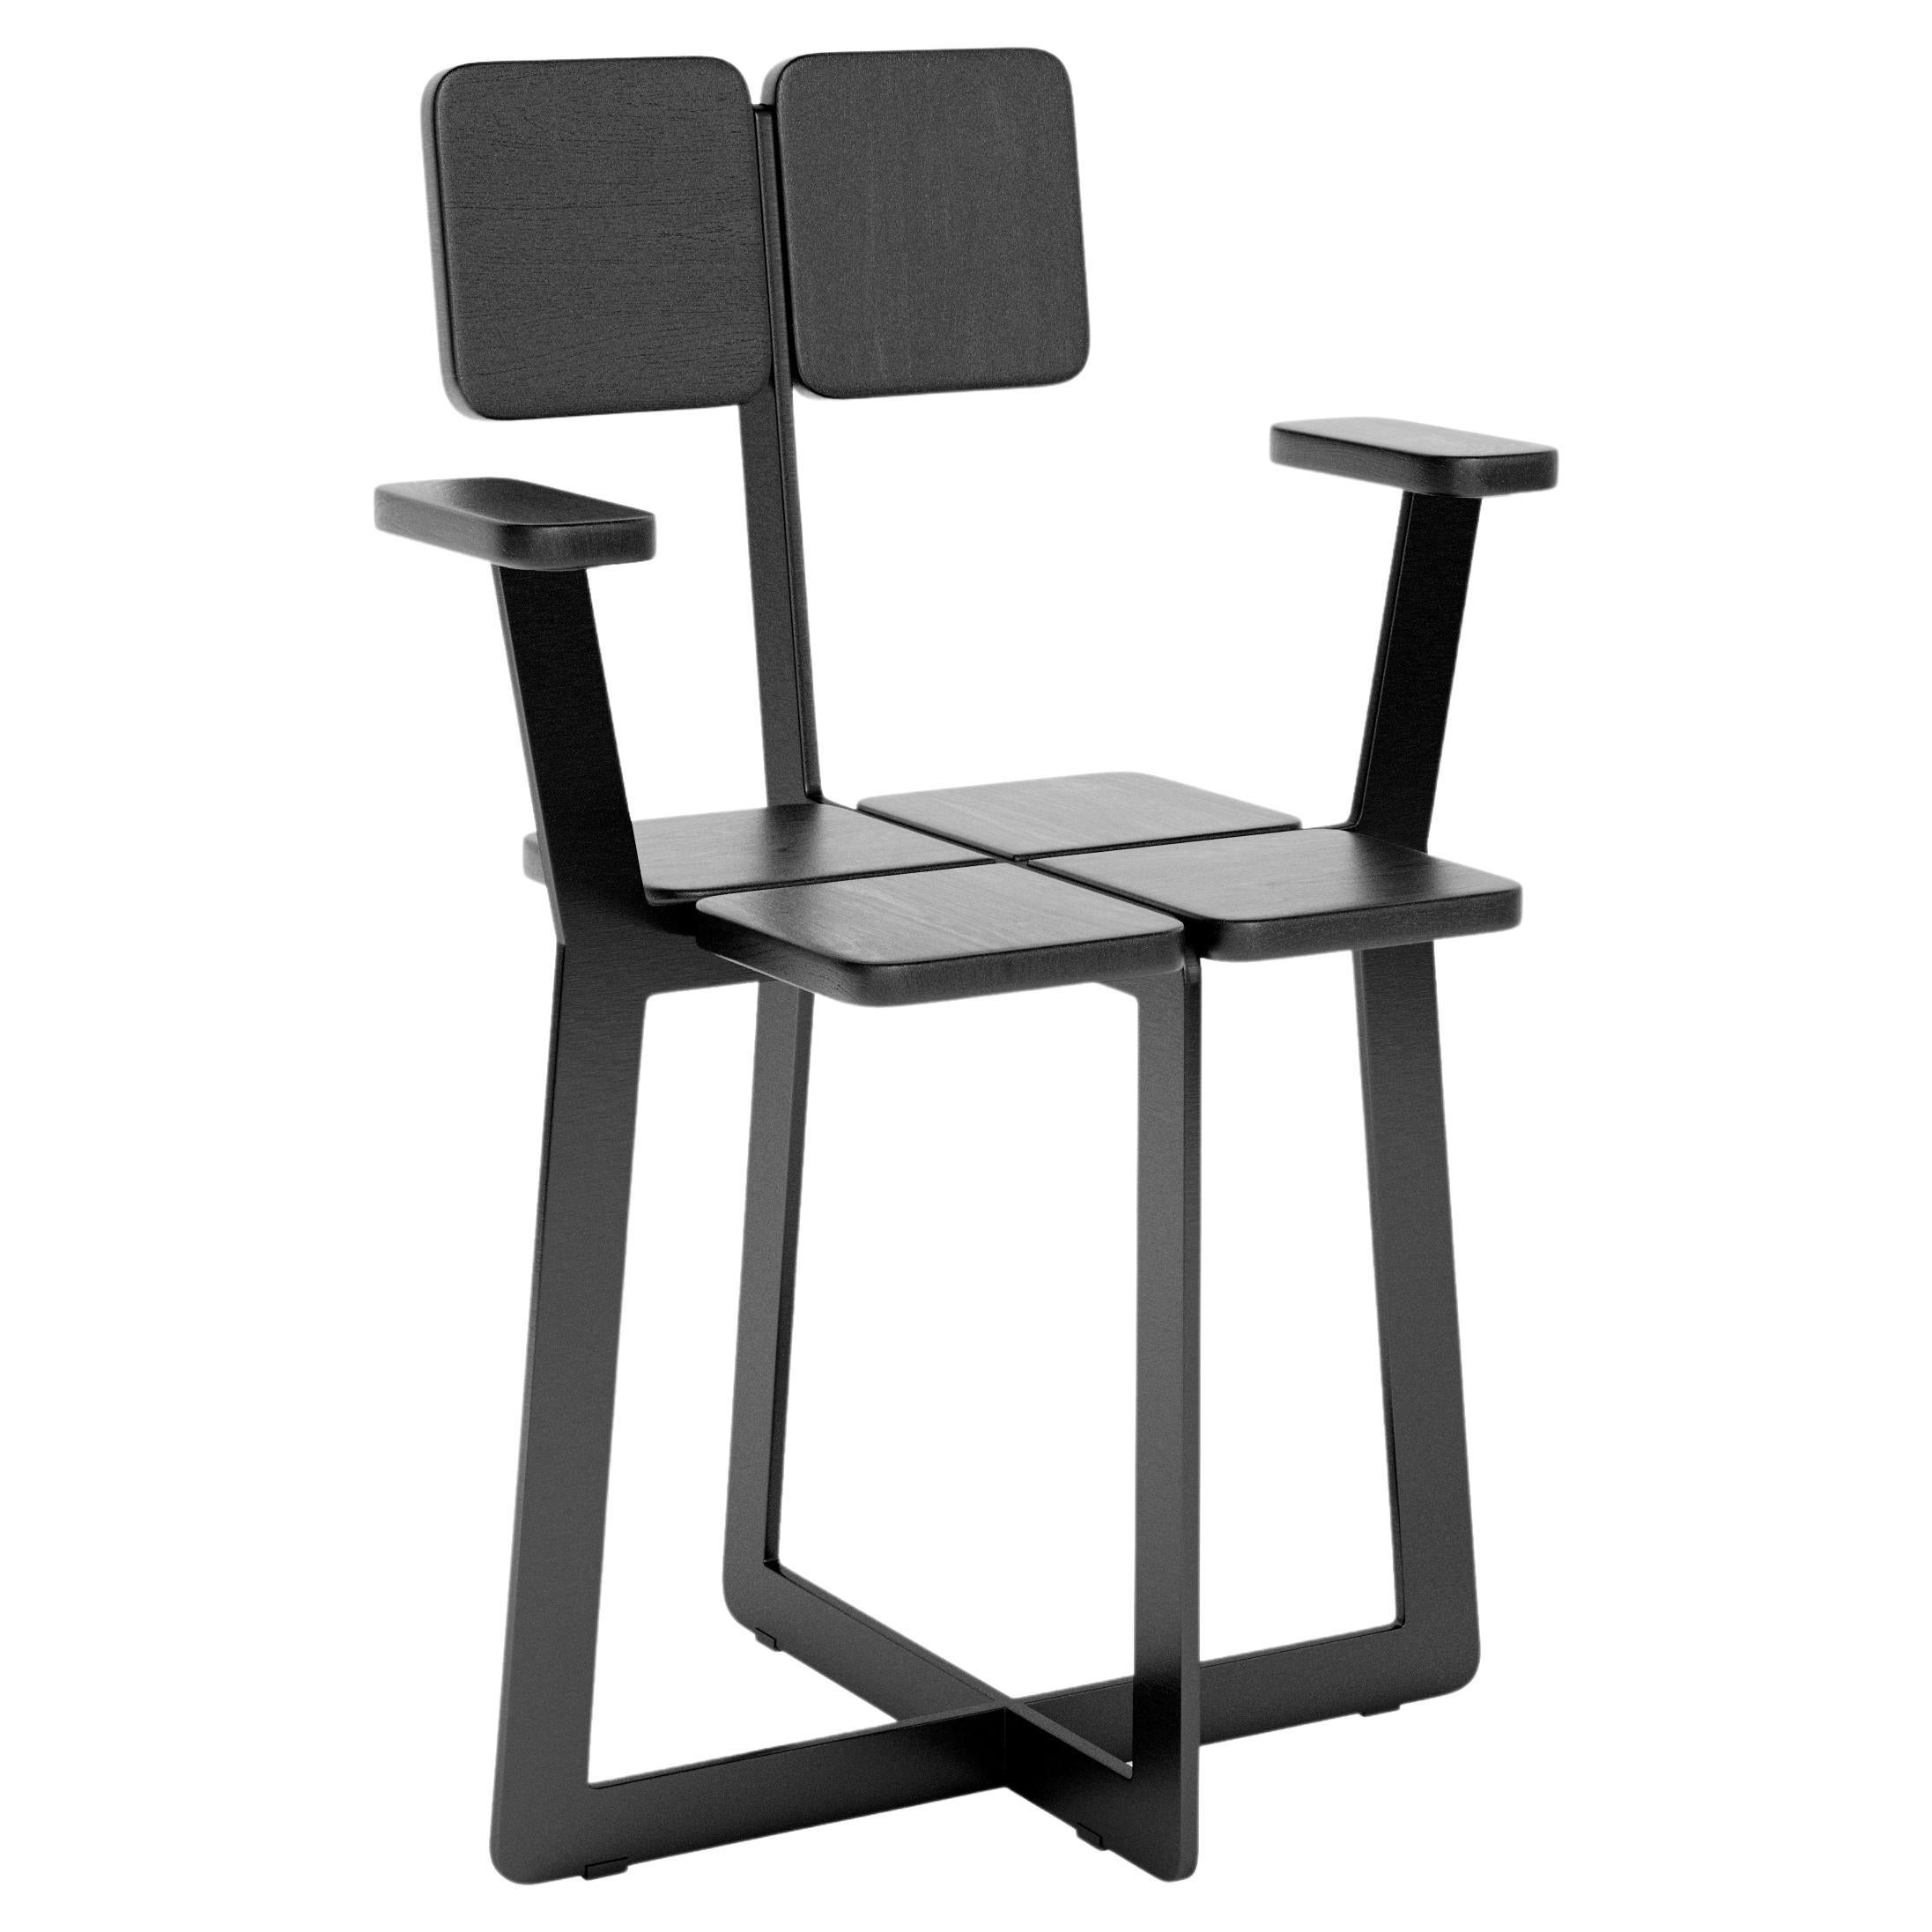 Modern Chair Gir A2 Made of Steel and Solid Wood by Dali Home